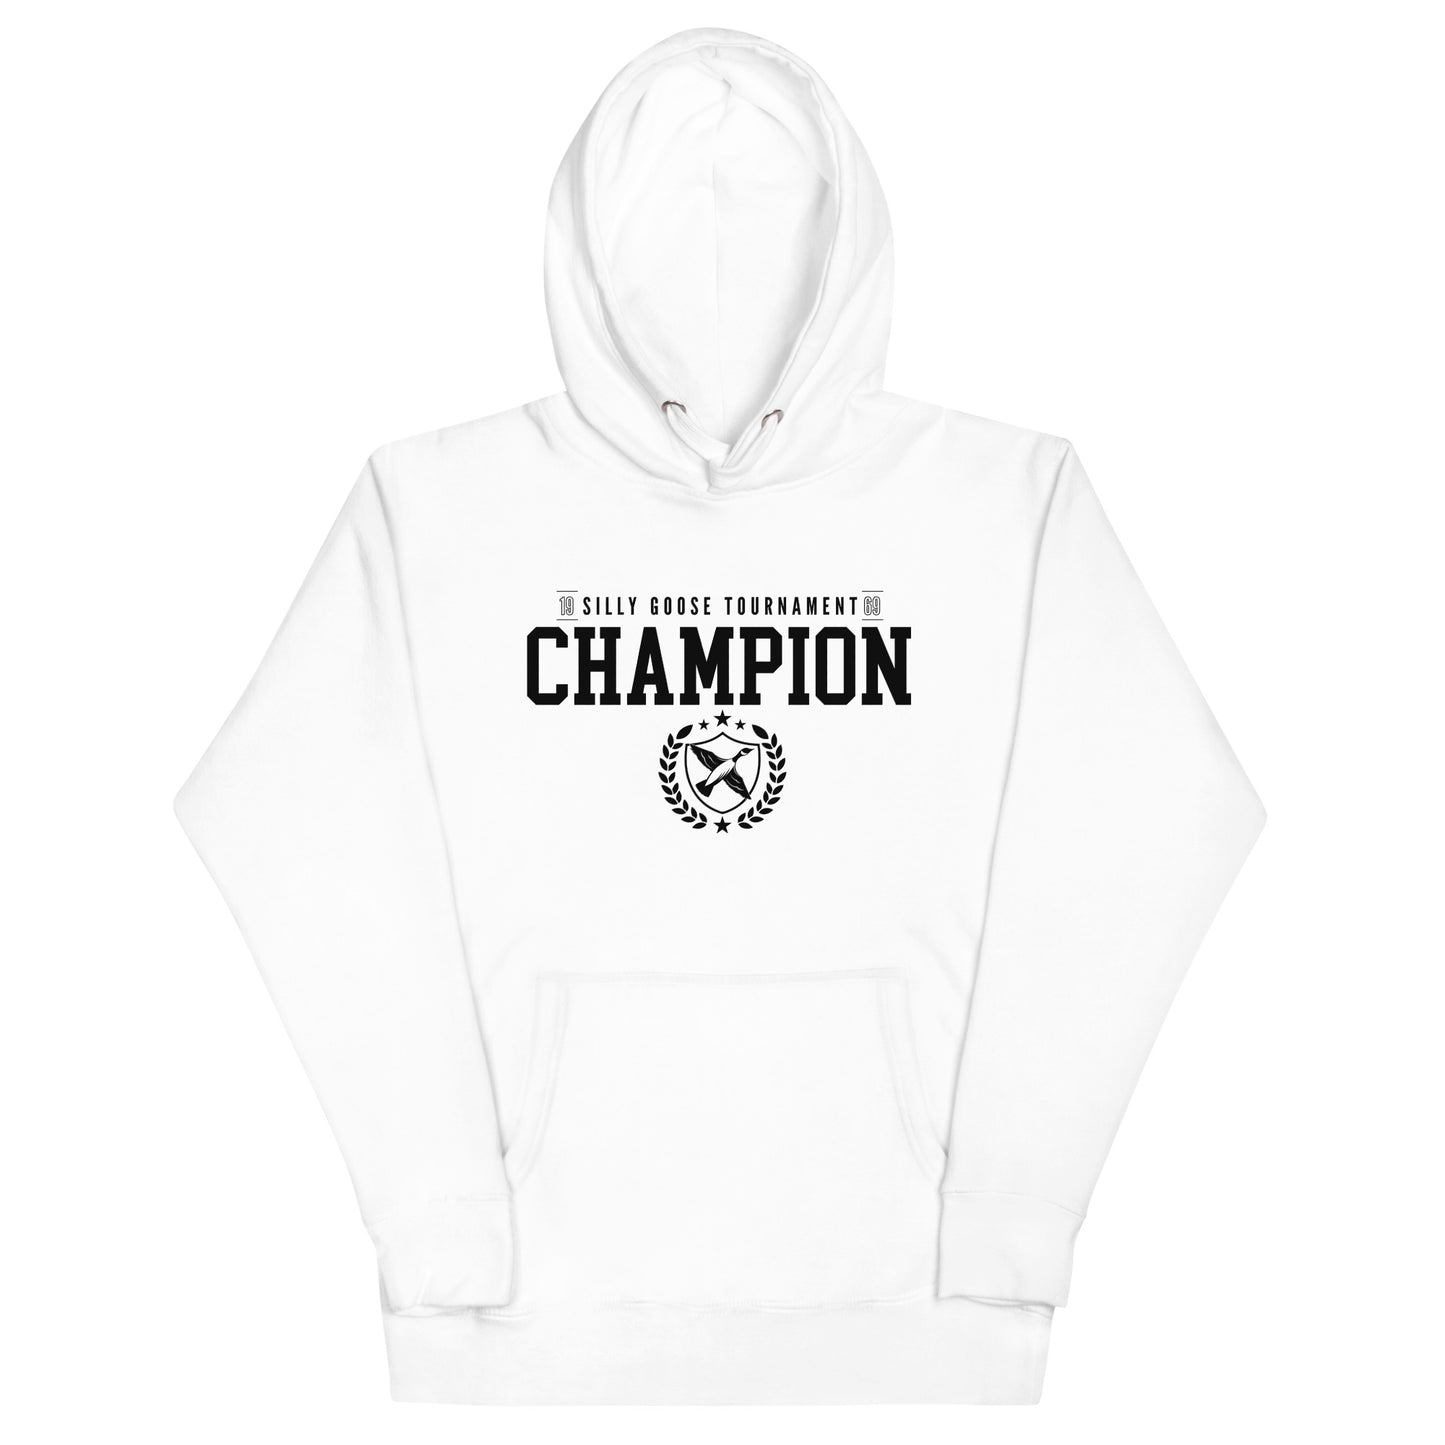 Silly Goose Tournament Champion Unisex Hoodie